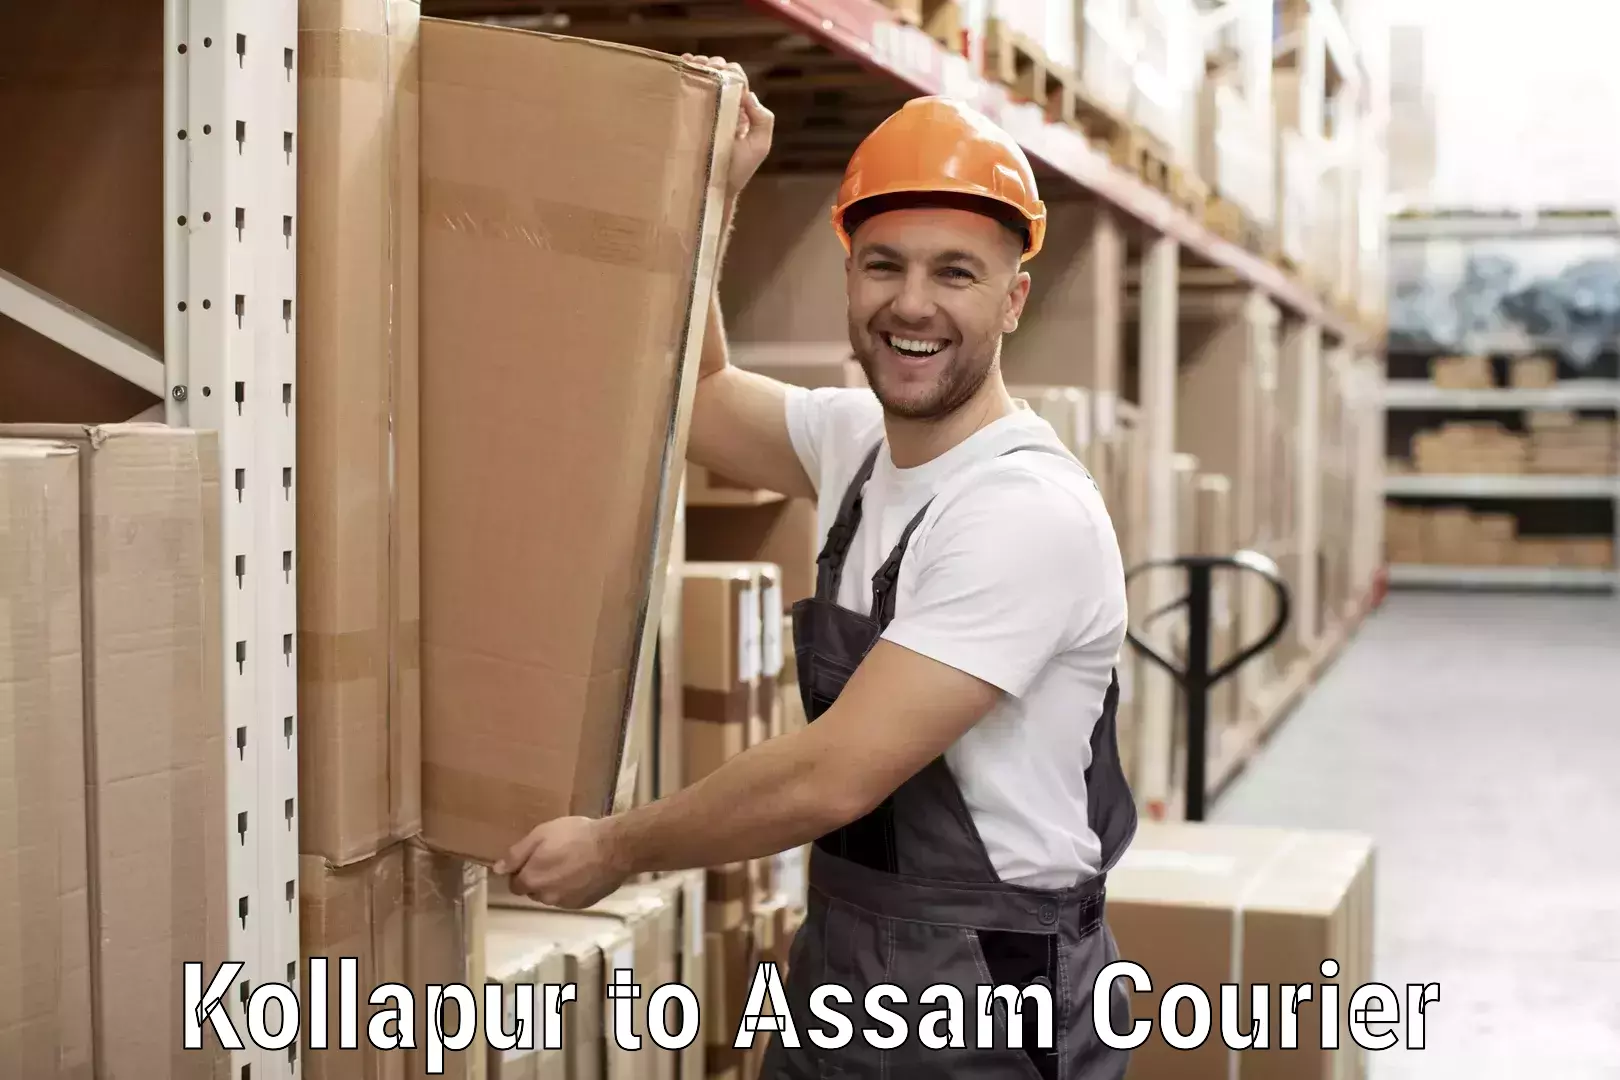 Large-scale shipping solutions Kollapur to Lala Assam